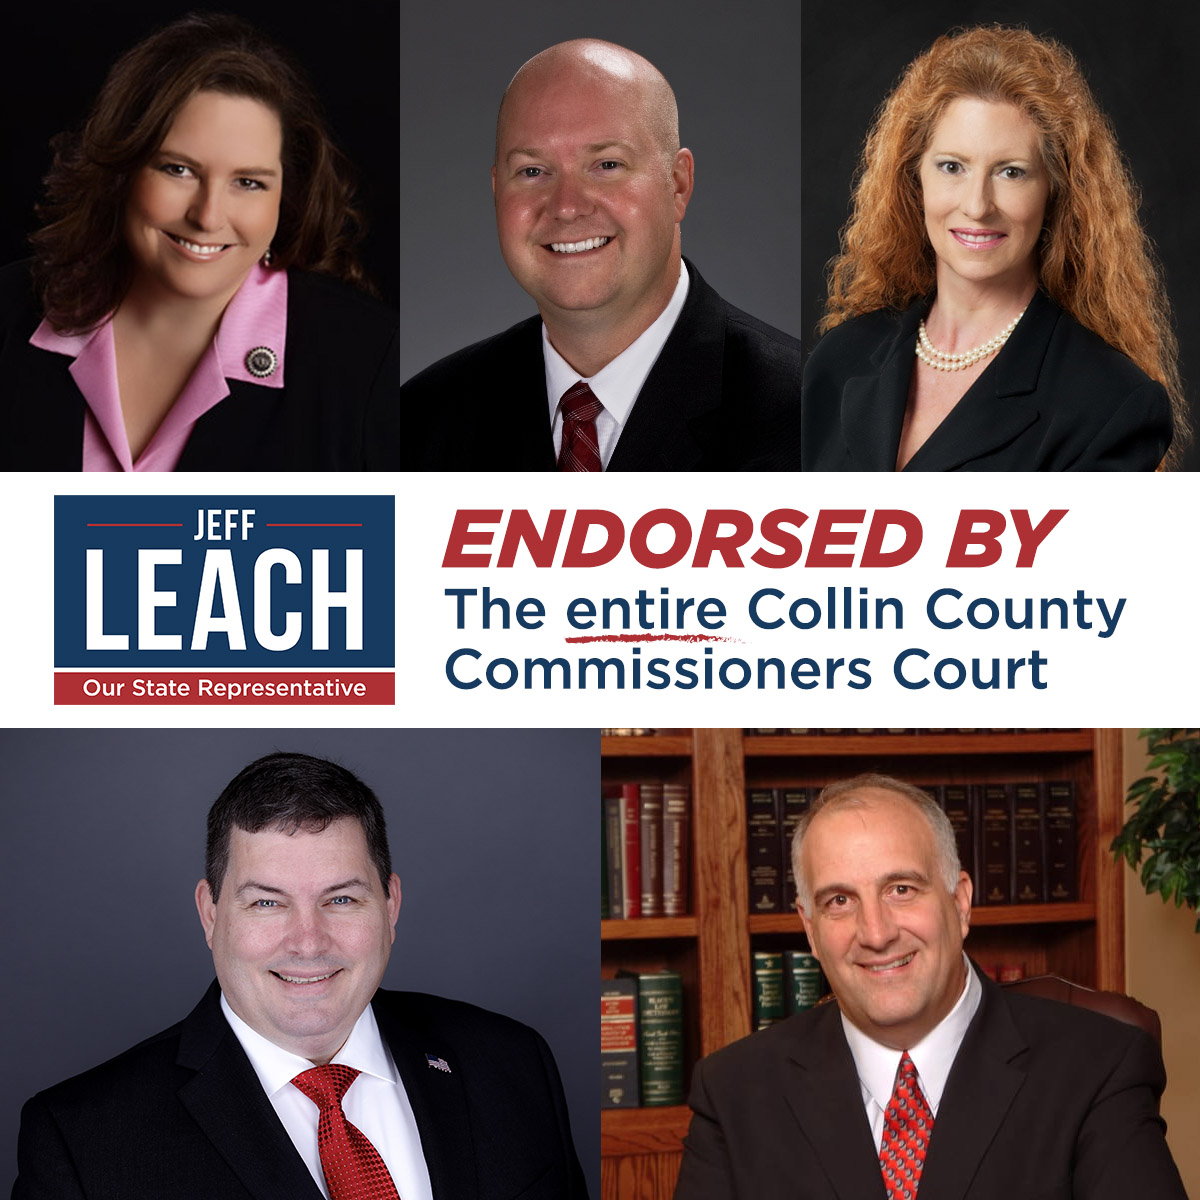 COLLIN COUNTY JUDGE & COMMISSIONERS UNANIMOUSLY ENDORSE REP LEACH FOR RE-ELECTION